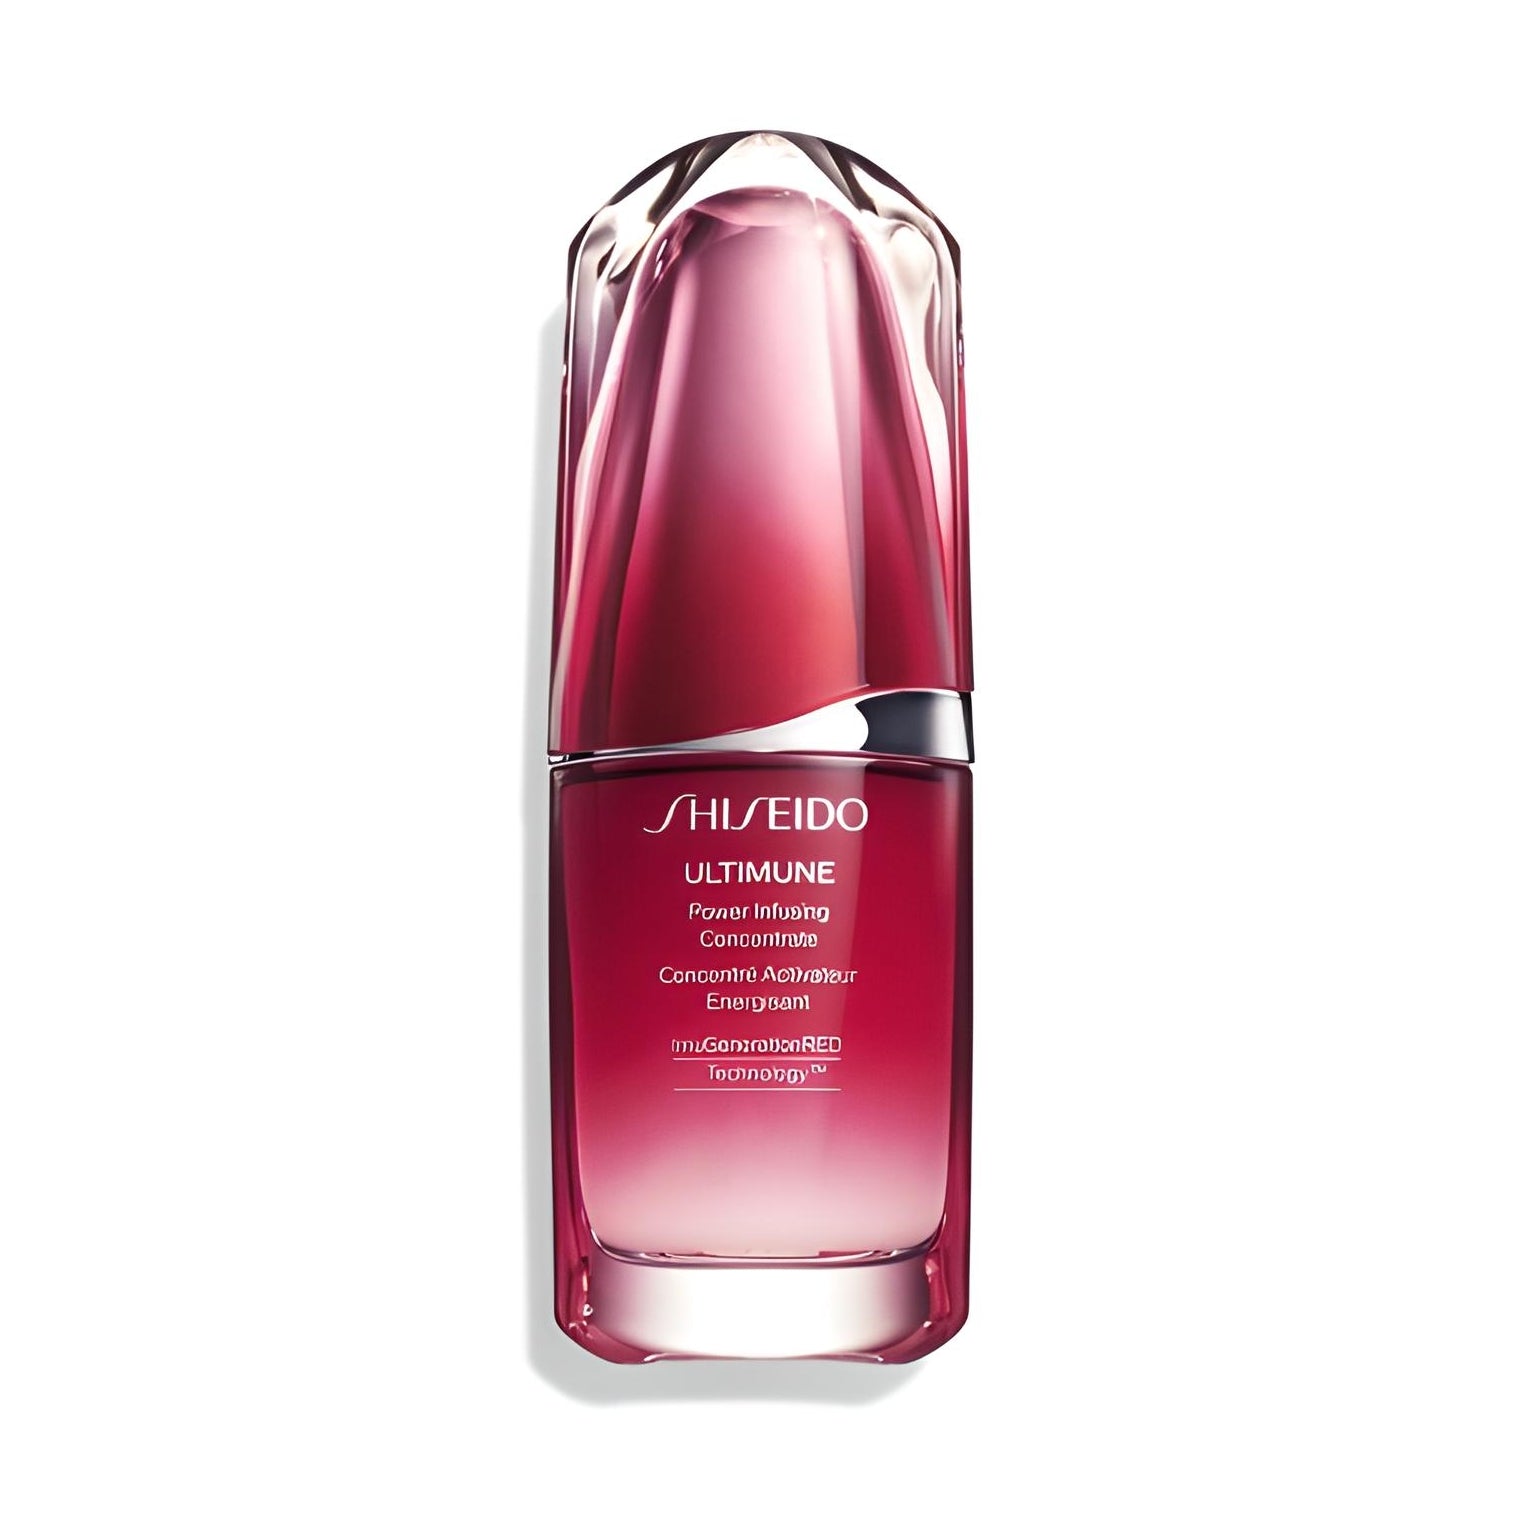 ULTIMUNE power infusing concentrate 3.0 Gesichtspflege SHISEIDO   